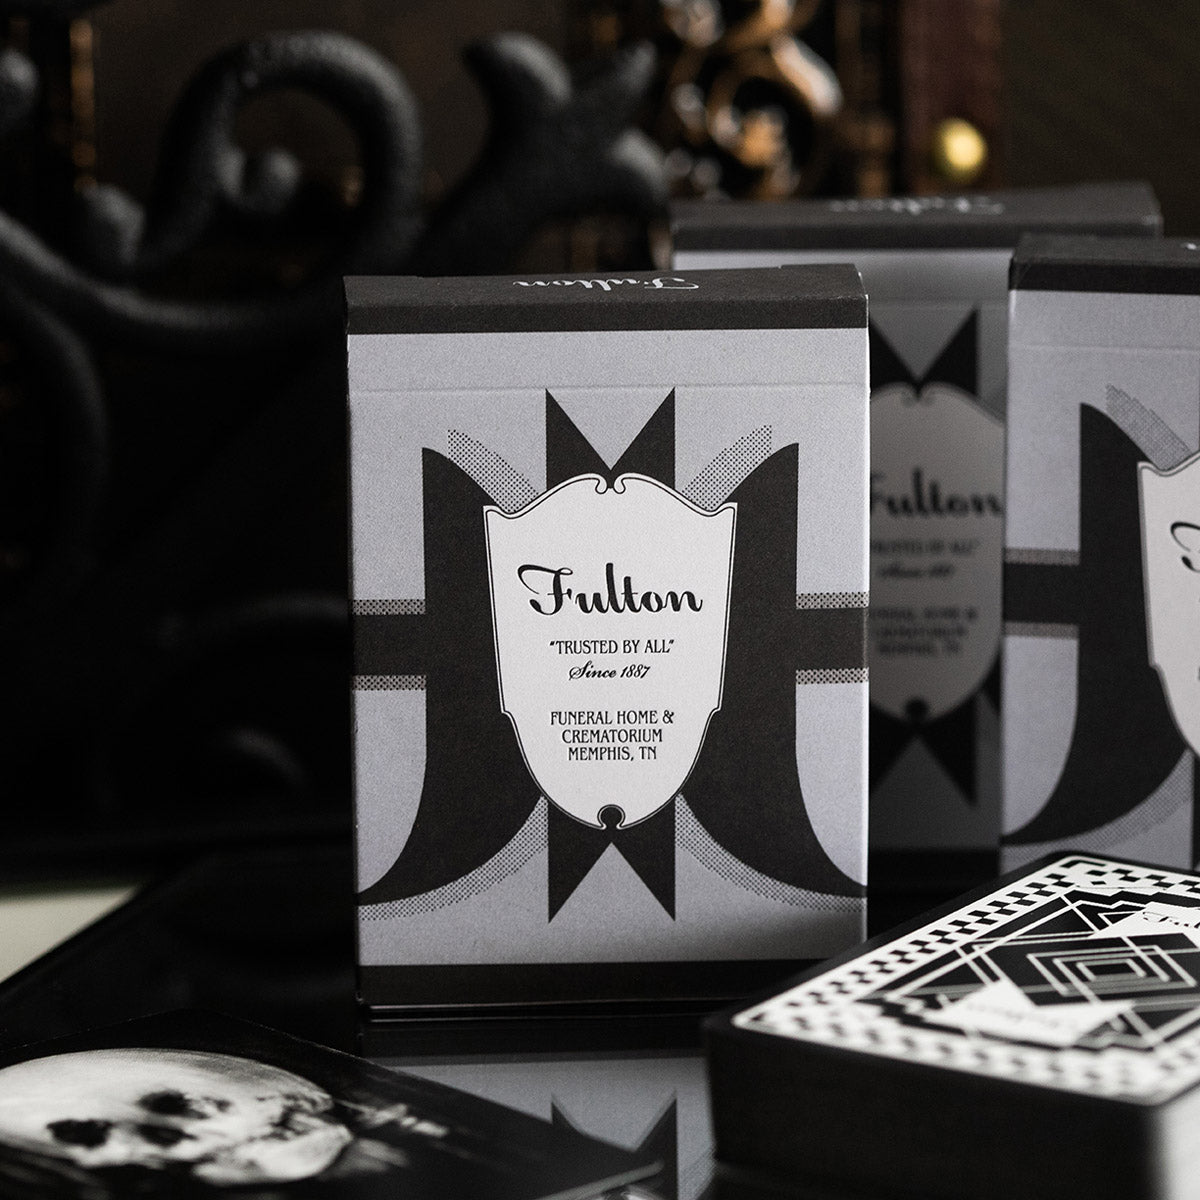 FULTON'S FUNERAL PLAYING CARDS